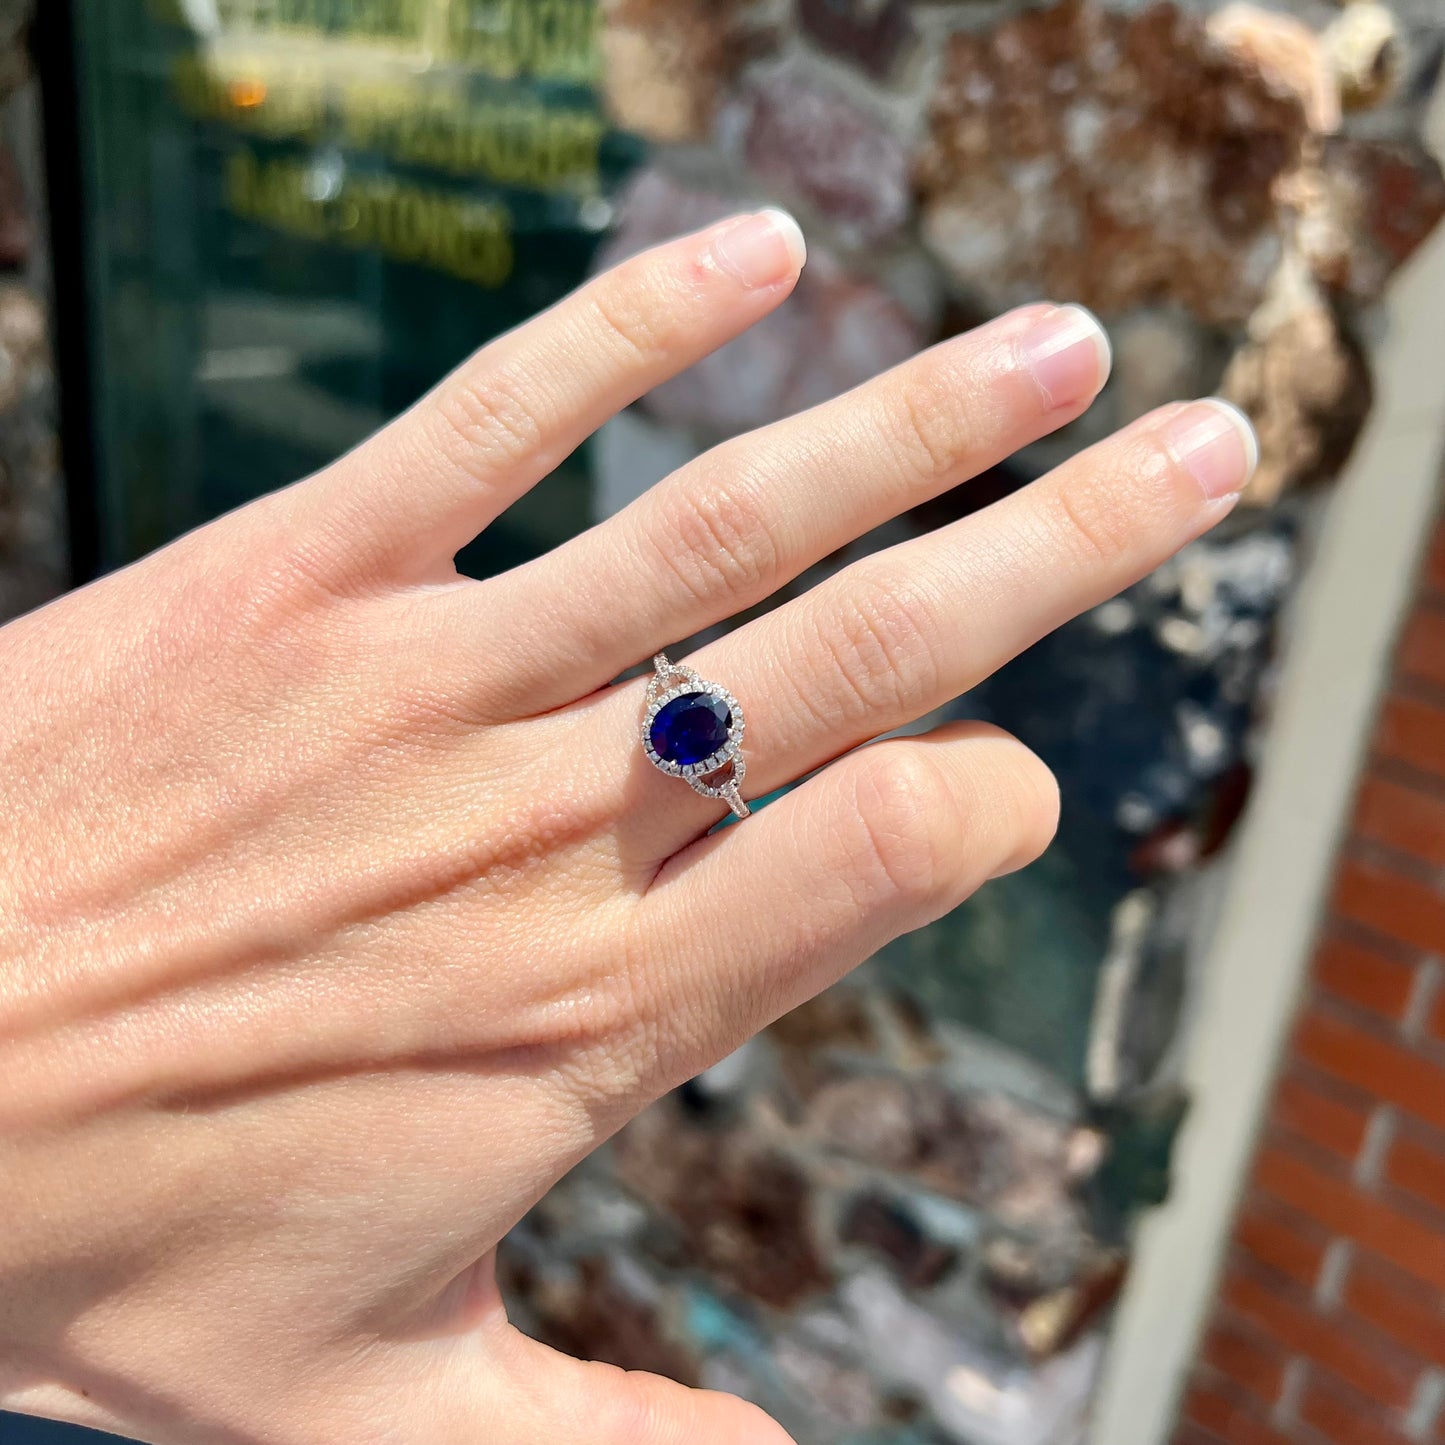 A sterling silver, white zircon halo ring set with an oval cut blue sapphire.